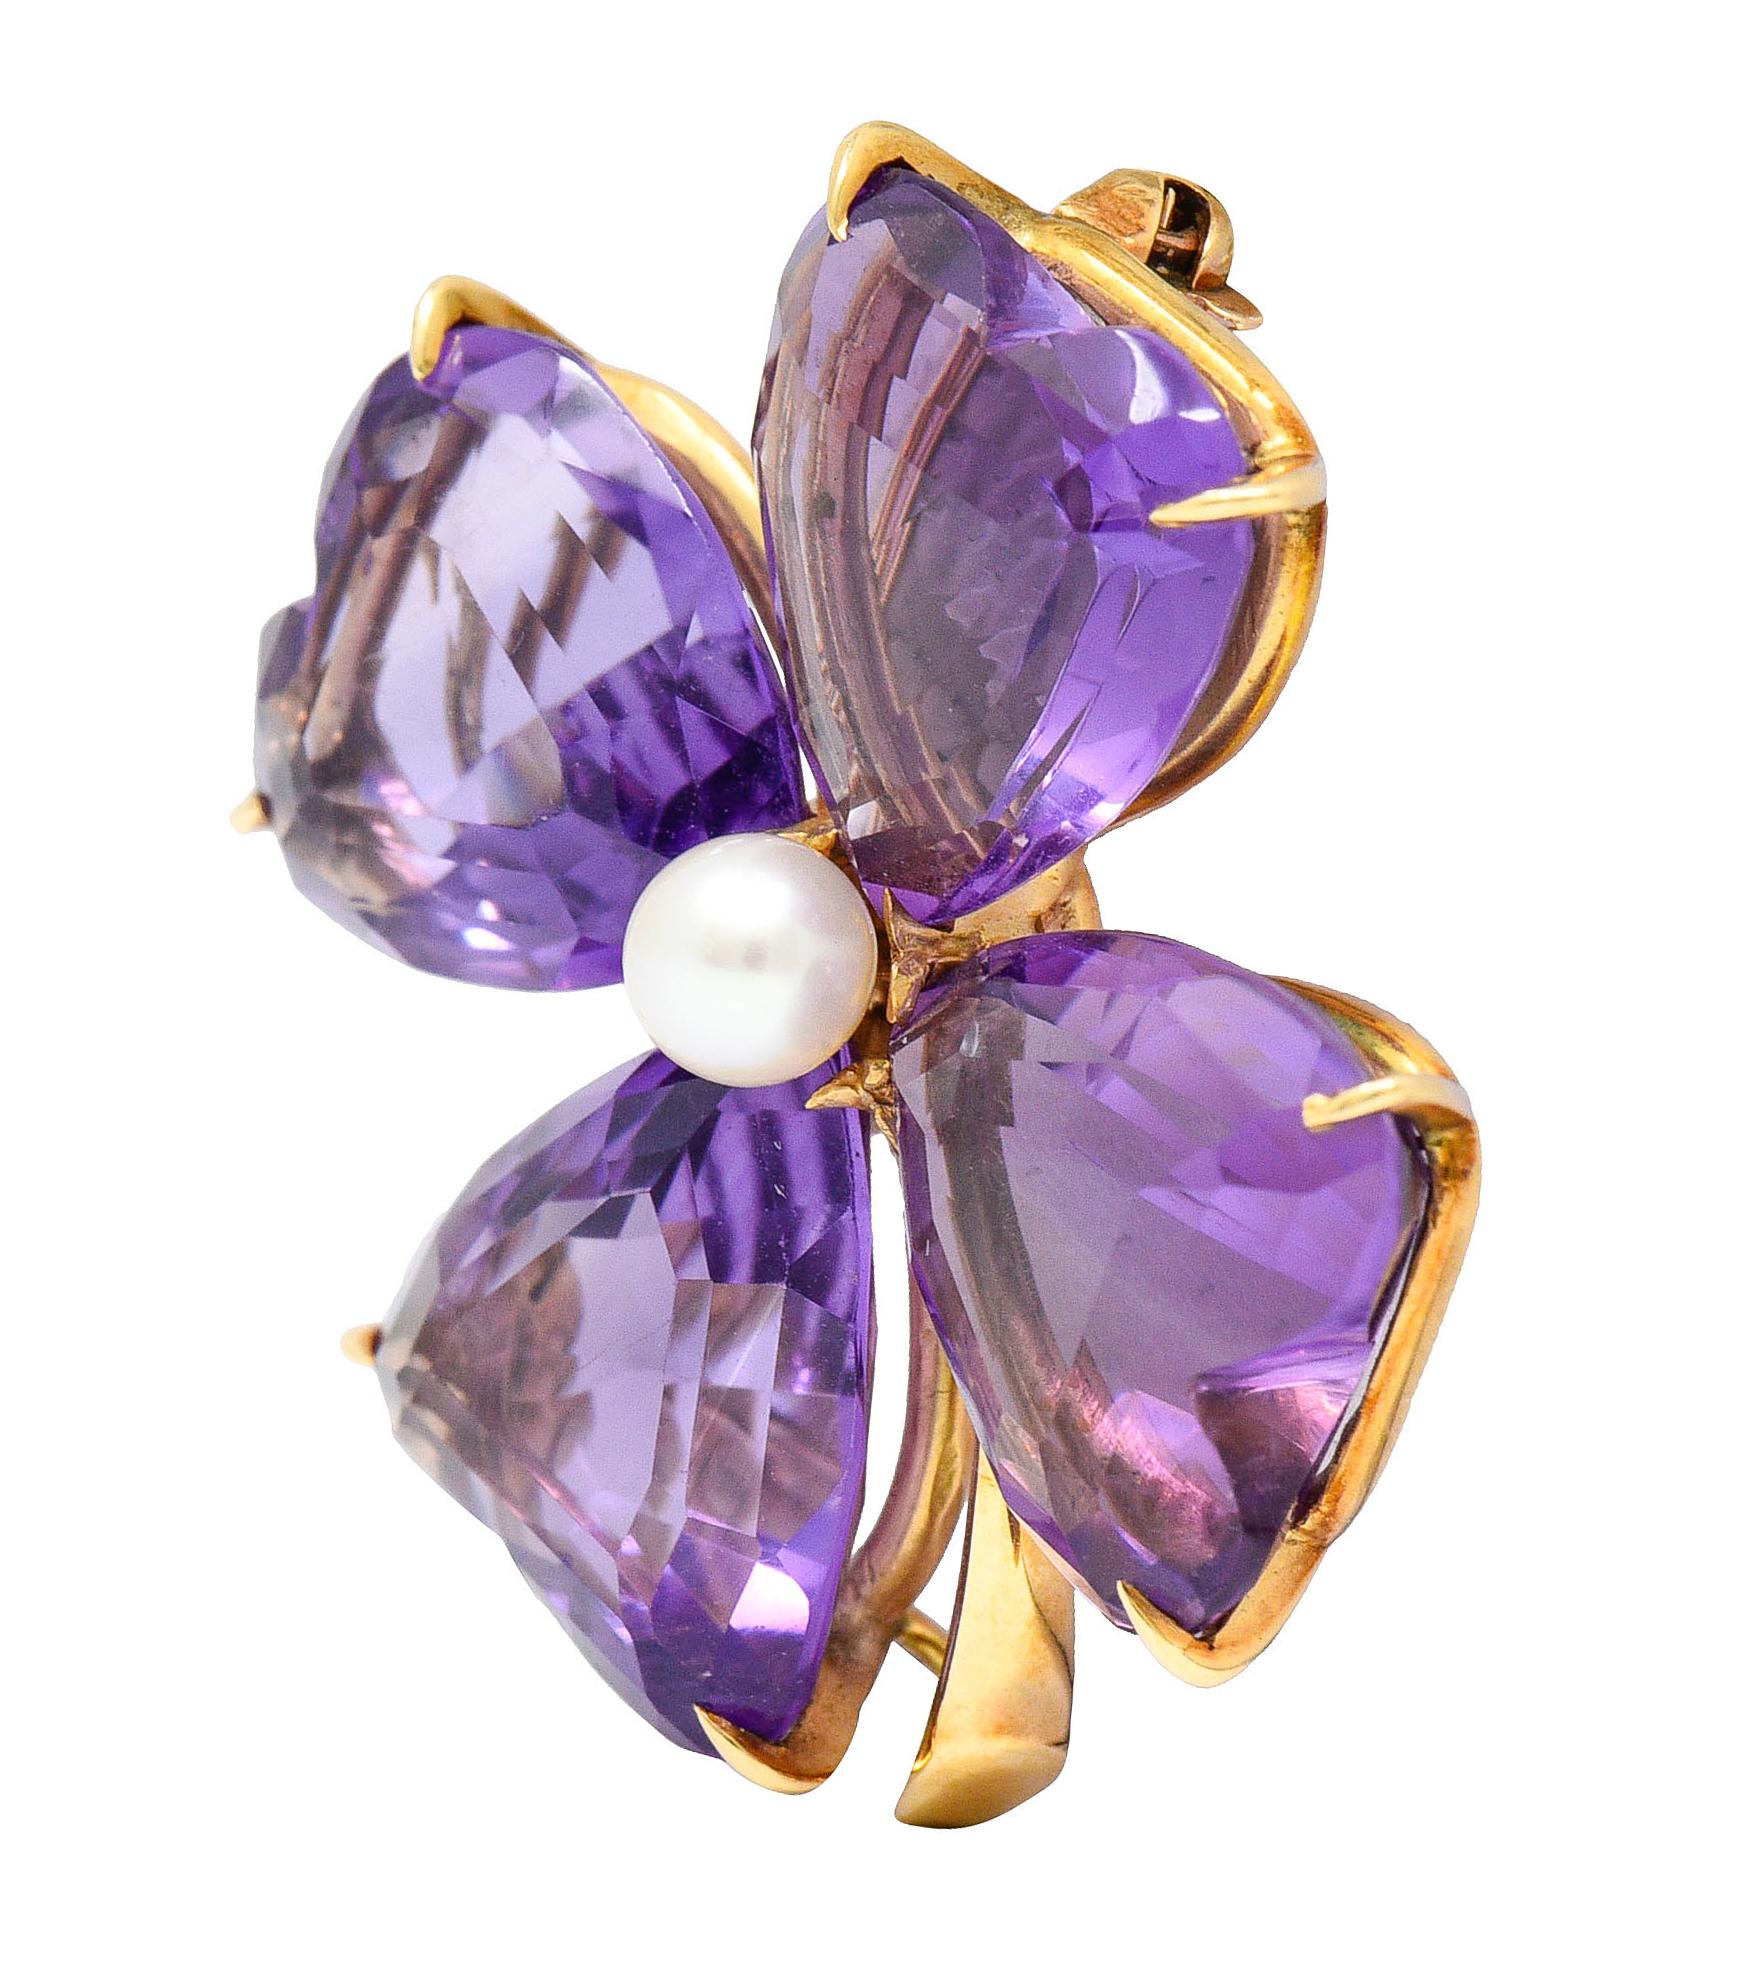 Designed as a four leaf clover with heart shaped cabochons of amethyst

Amethyst are claw set and very well matched violet purple; measuring 14mm x 14mm

A 5mm pearl accent is centered having rosè overtones; good in luster

Completed with a pin